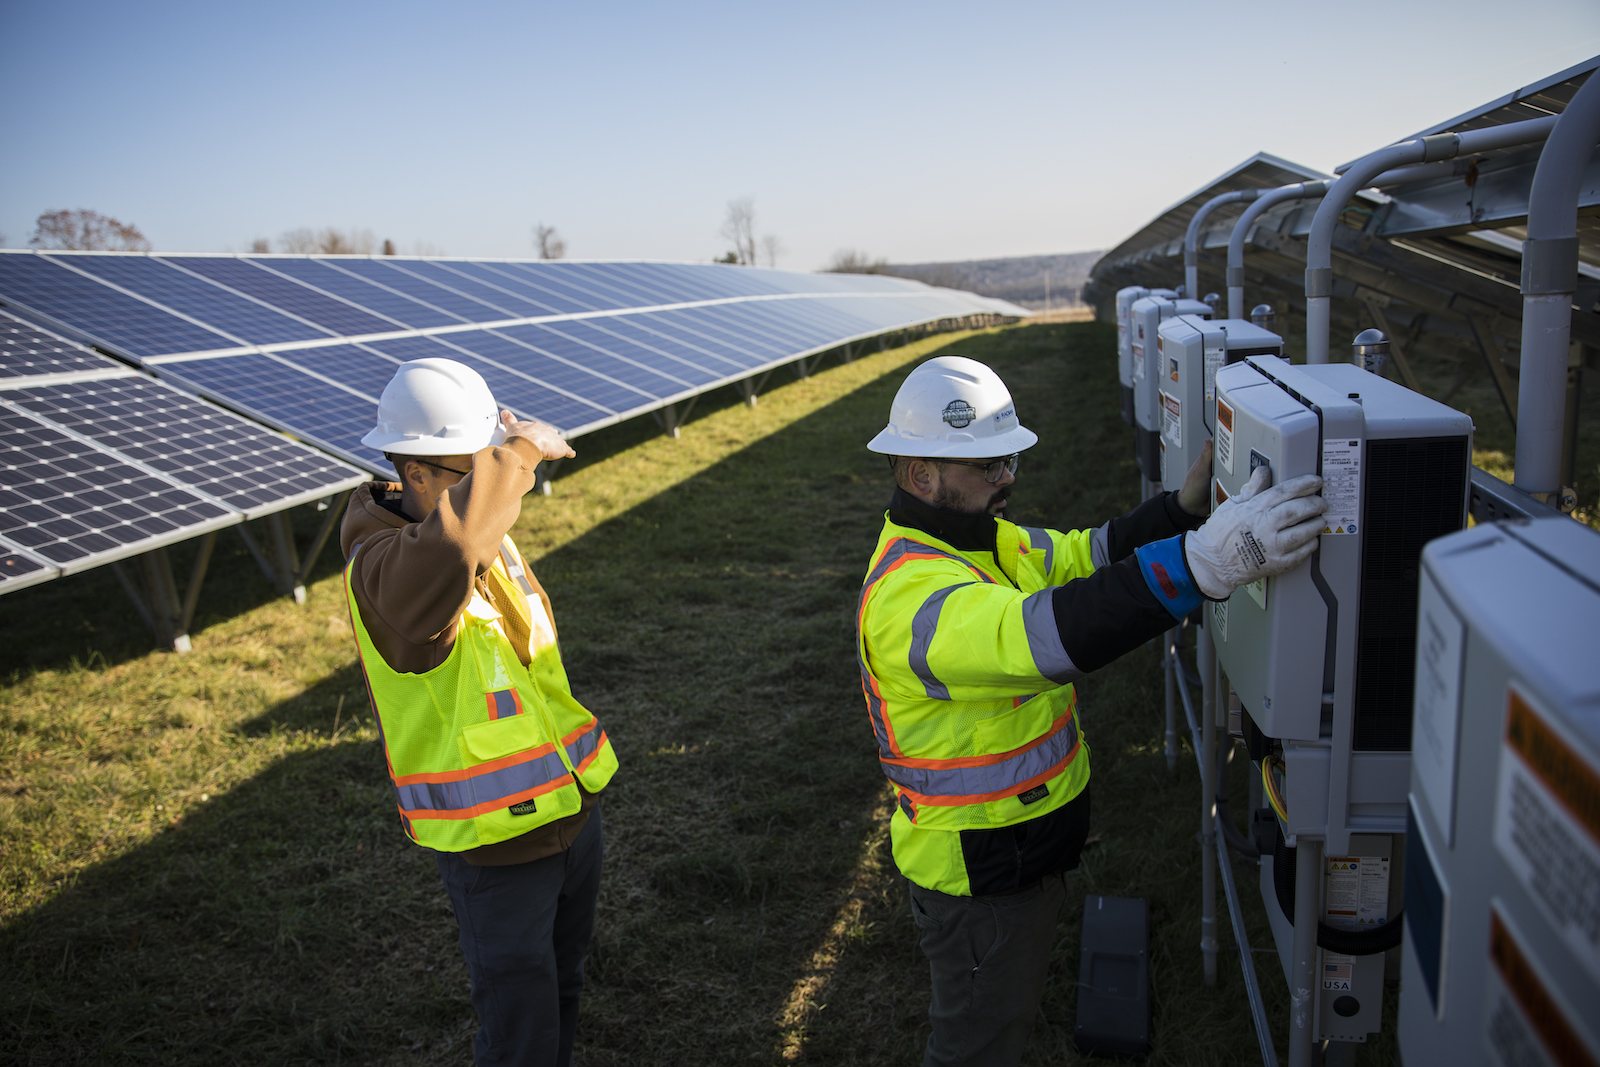 Employees from a Radian Generation's operations and maintenance team change out a faulty solar inverter along a row of solar panels December 4, 2017 in Oxford, Massachusetts. The 16.5 megawatt solar array, on what was once the largest pig farm in the northeast, is owned and operated by BlueWave Solar which feeds the generated electricity to homes and small businesses and to the Fay School and Phillips Academy Andover private schools.